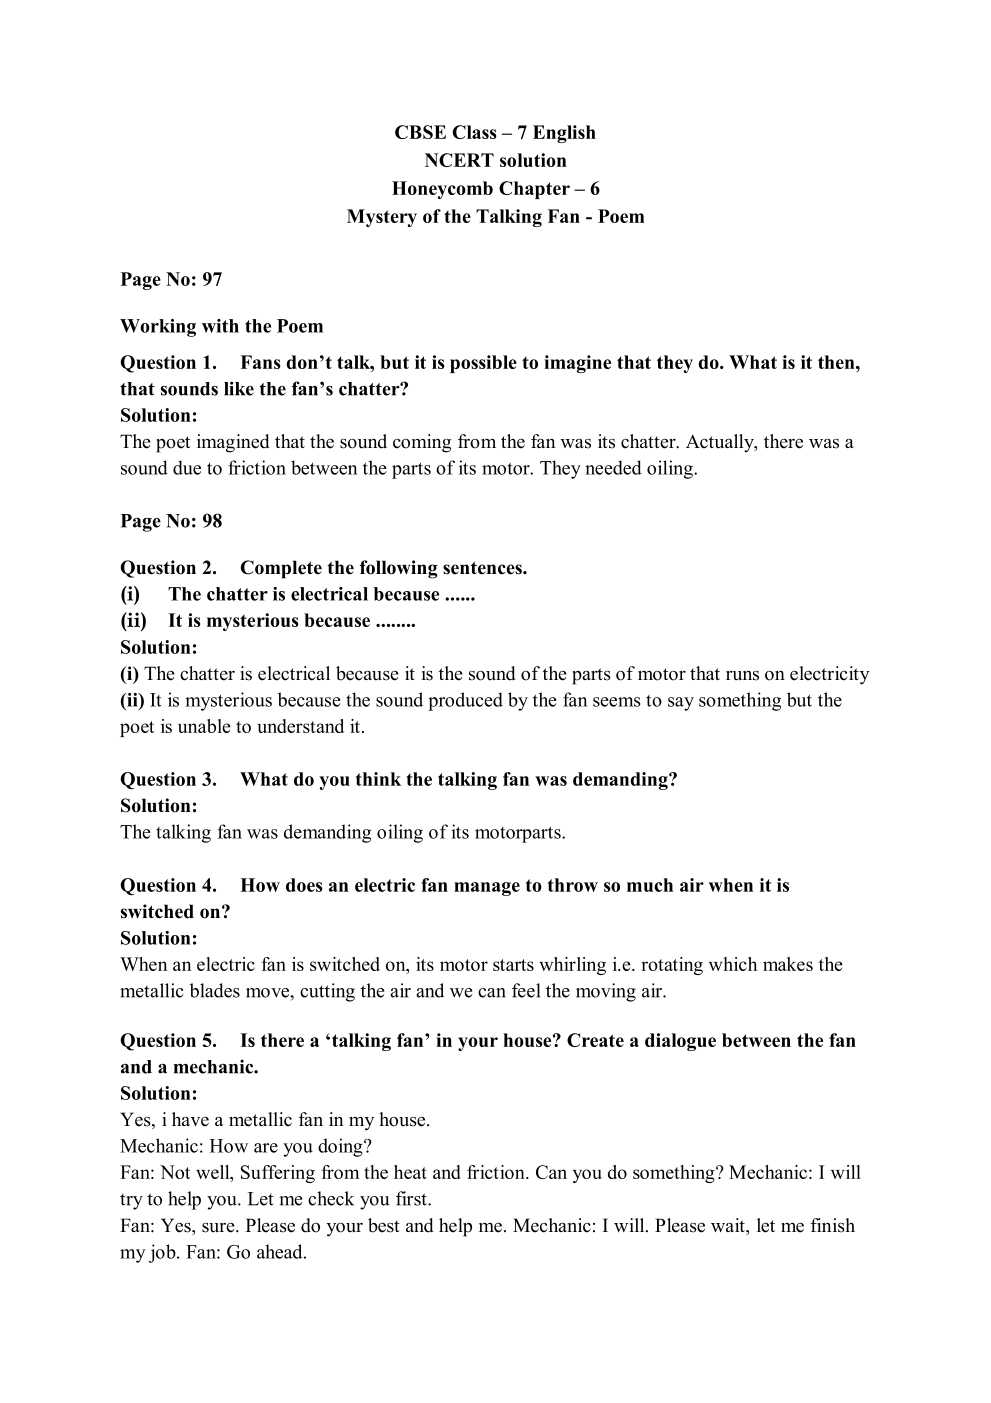 NCERT Solutions For Class 7 English Honeycomb Poem Chapter 6 Mystery of the Talking Fan 